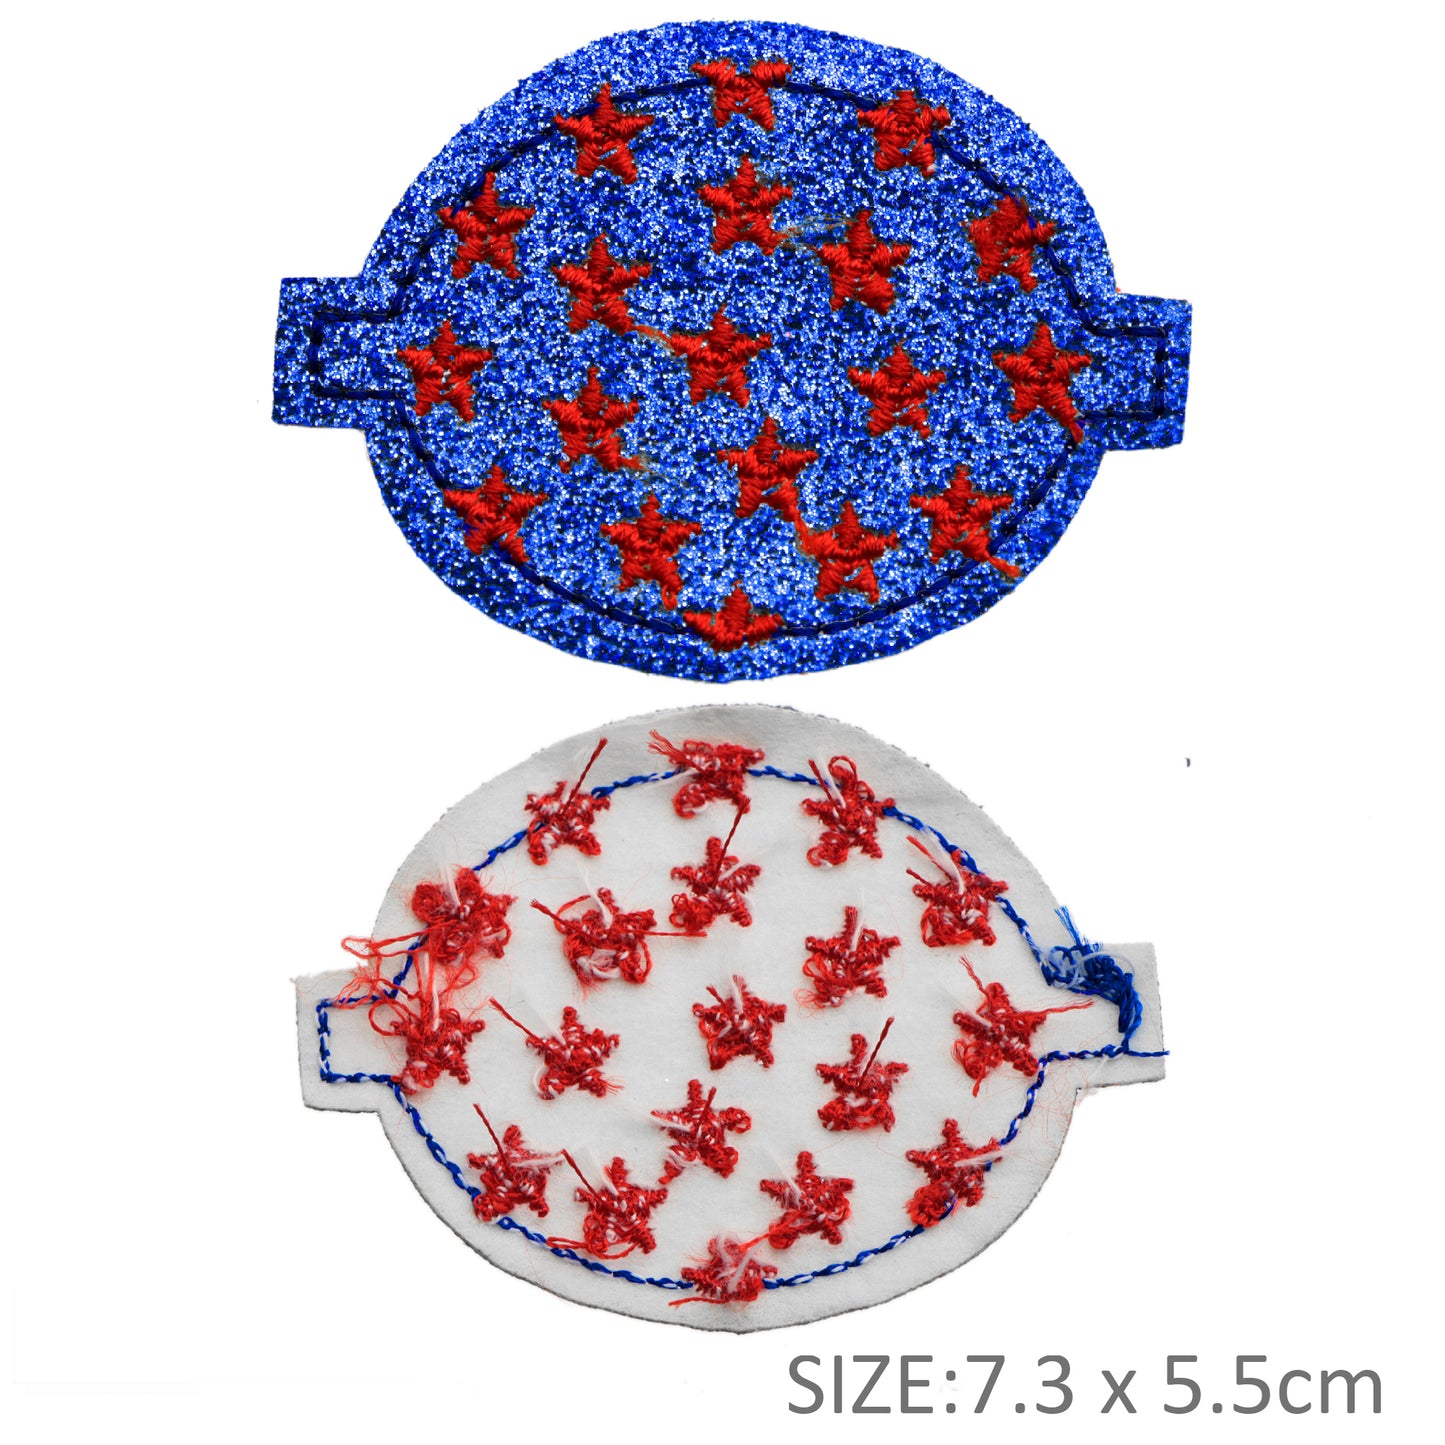 4th of July Embroidery Patches Wholesale